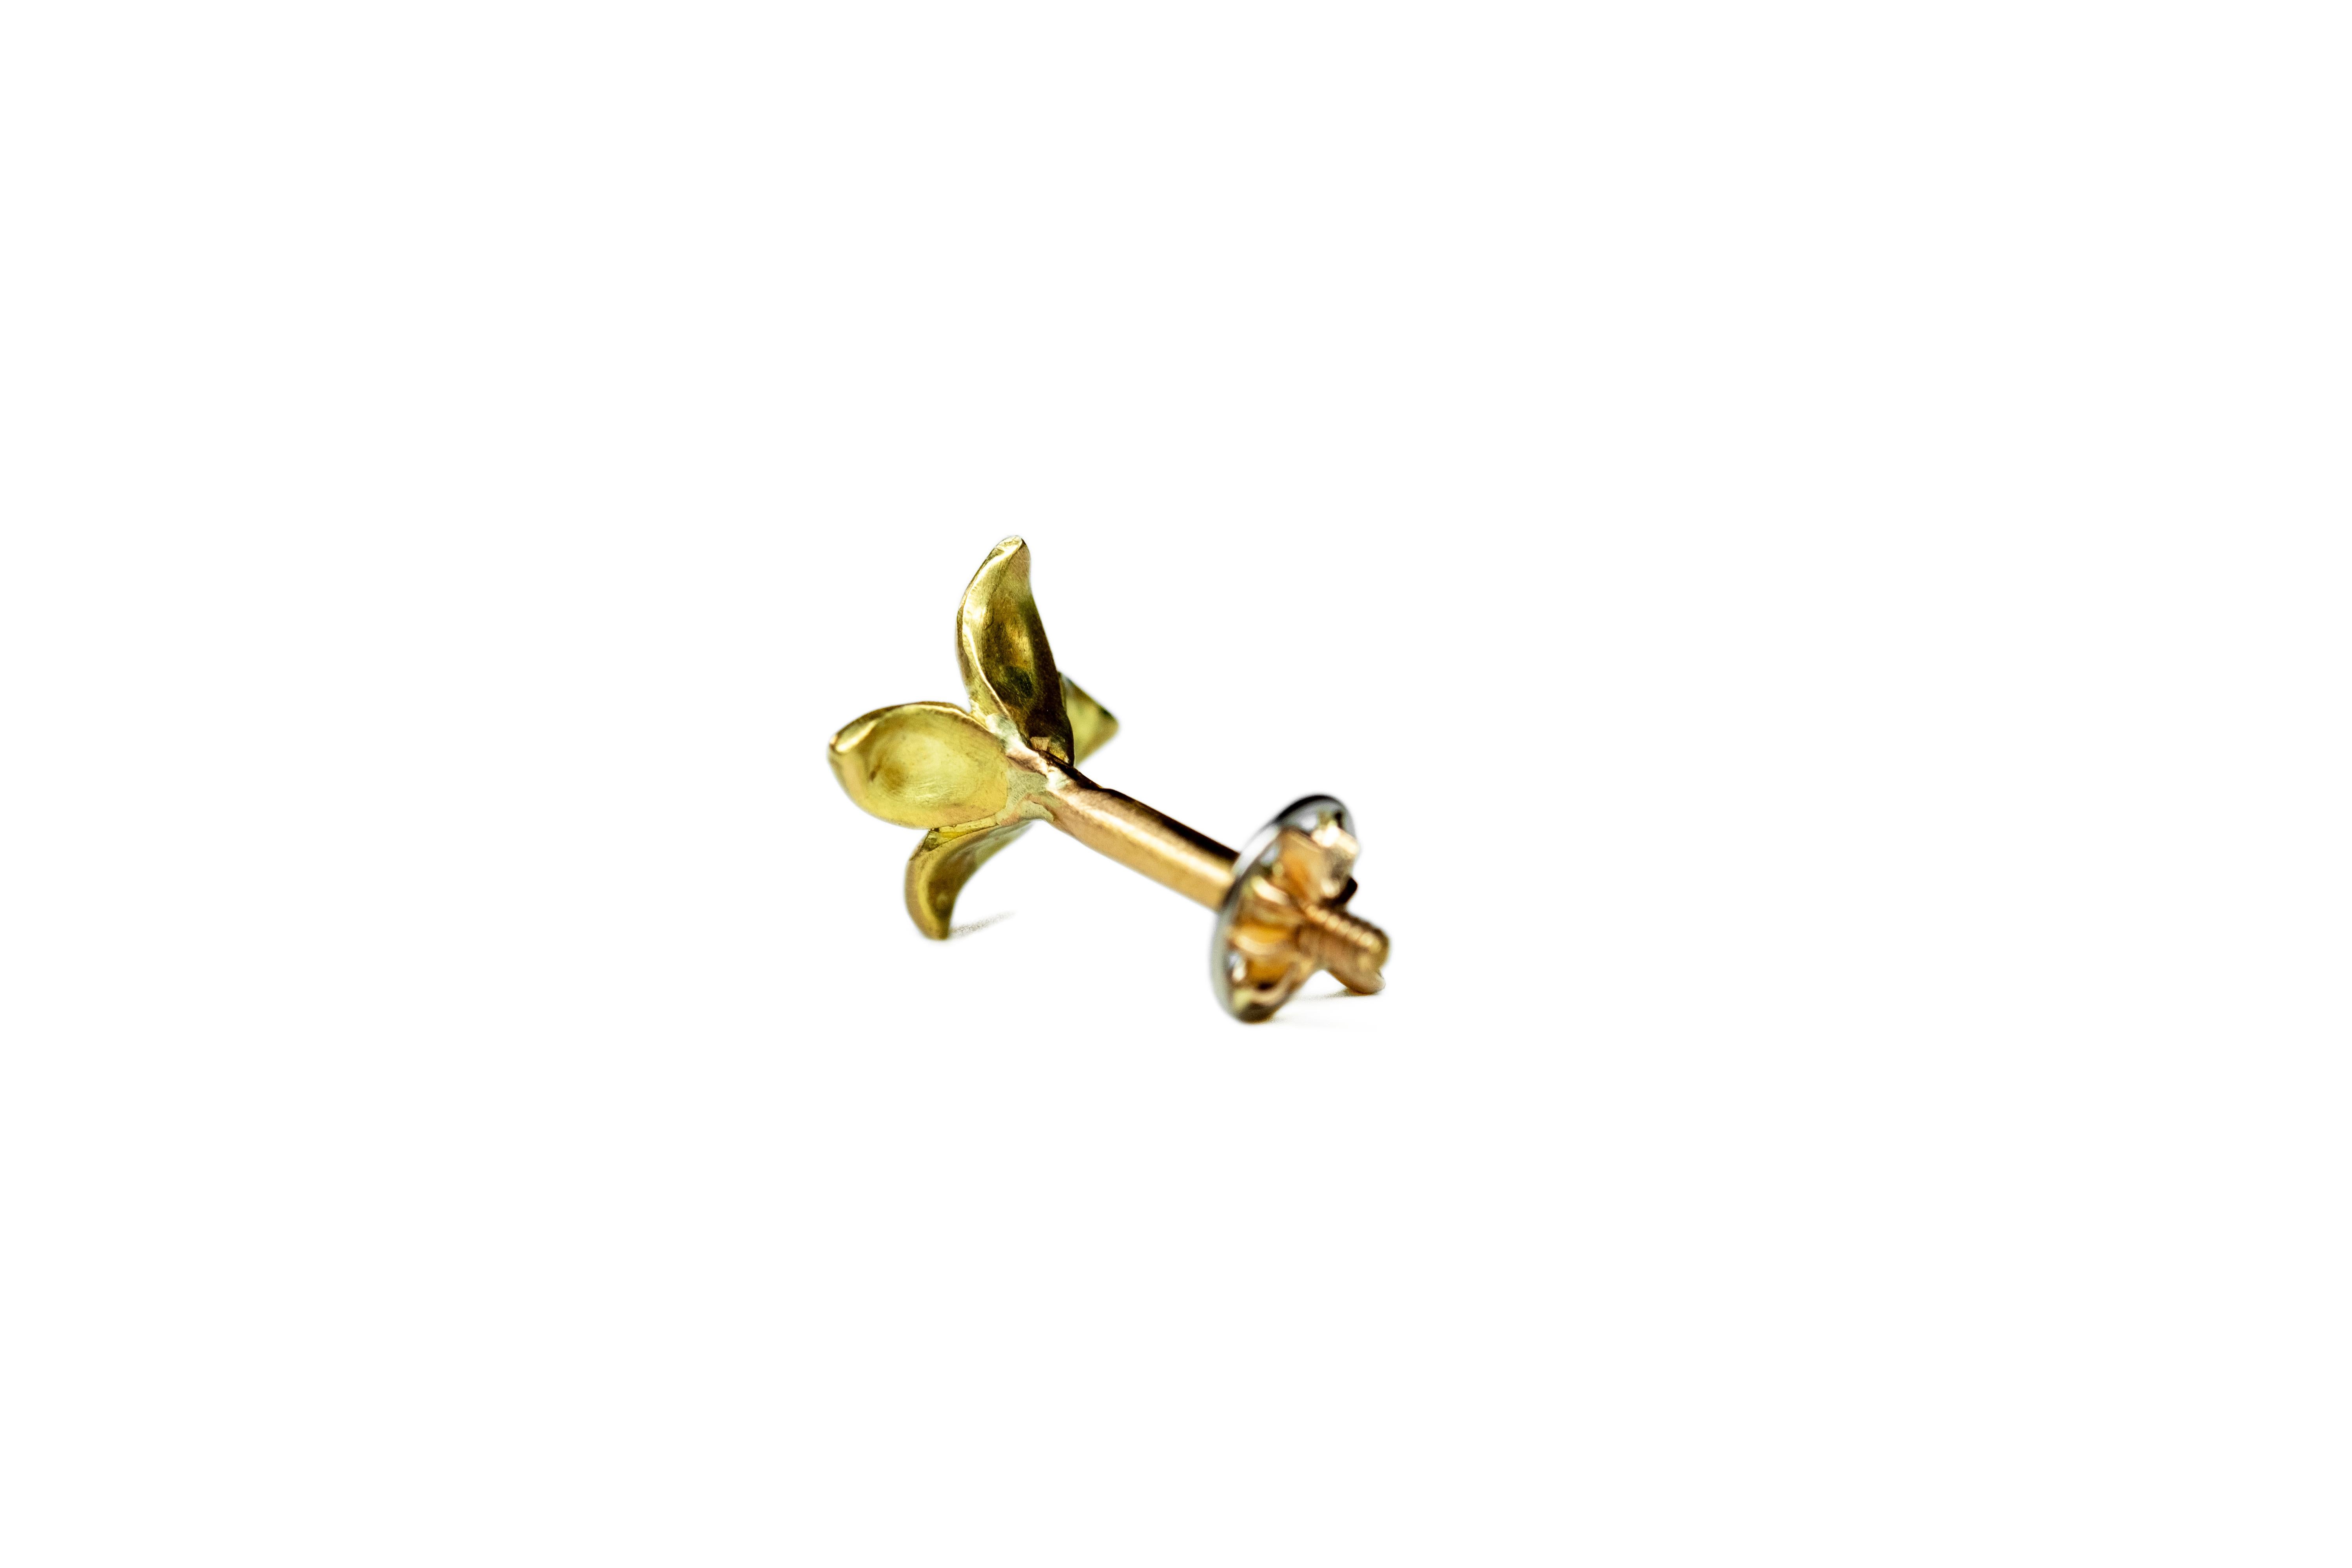 Flower-shaped ear piercing, completely handmade from 18K yellow Fairmined gold and Canadamark diamonds.

The flower screws into the star at the back. The screw is handmade. We suggest closing it gently and being careful not to force it. Support and